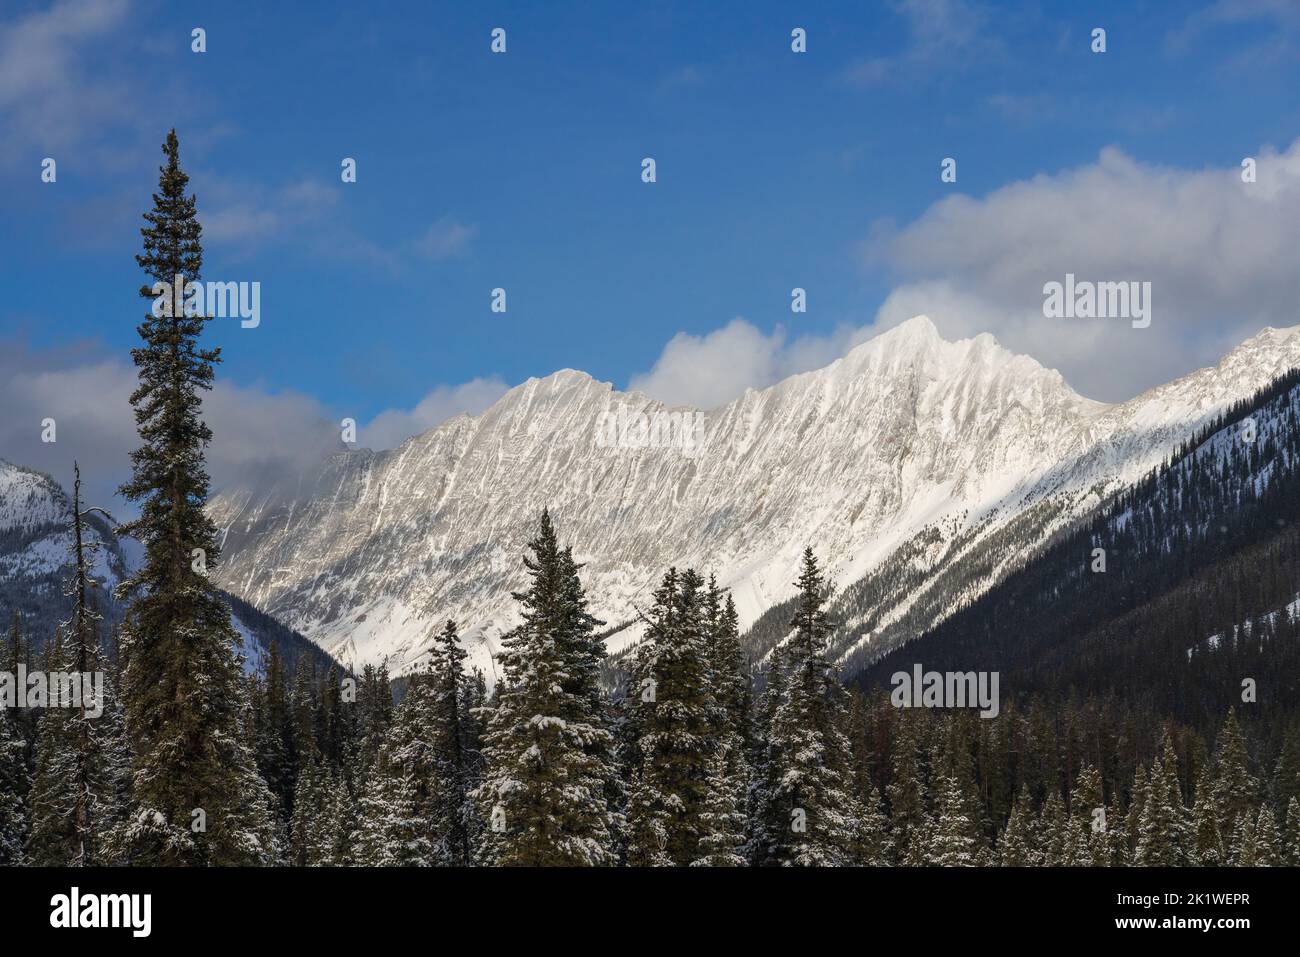 A mountain and forest scenic along the Maligne Lake road in winter, Jasper National Park, Alberta, Canada. Stock Photo